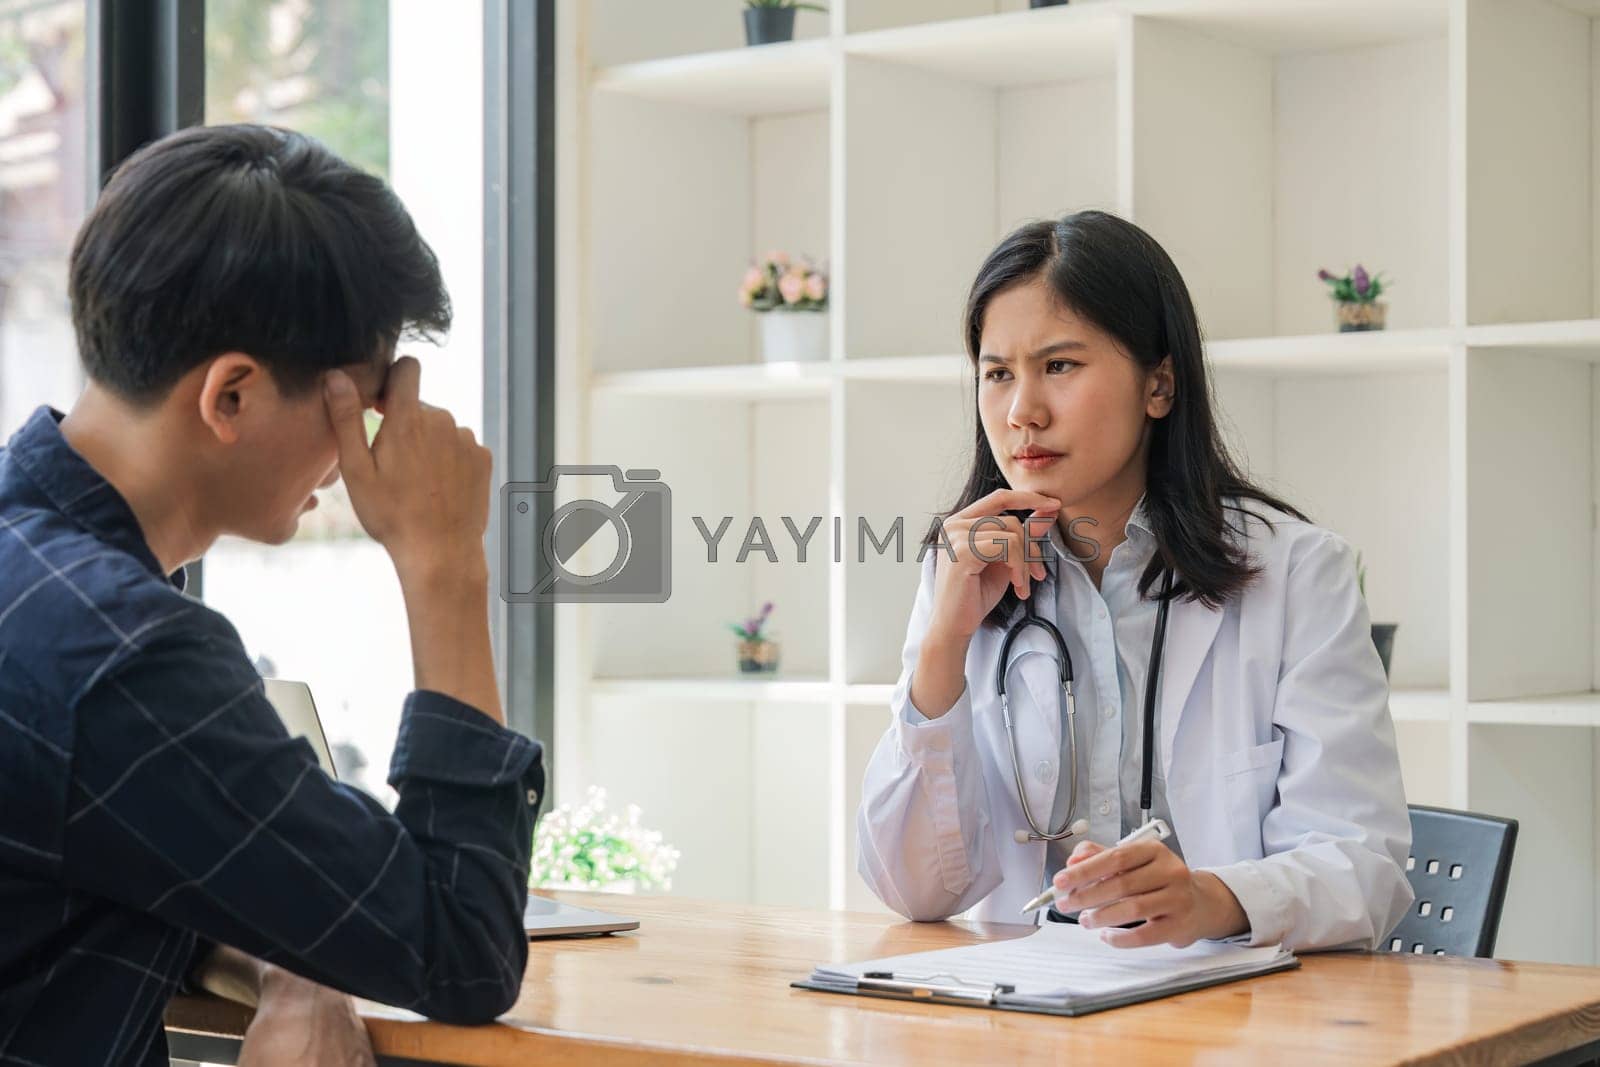 Royalty free image of Young asian woman doctor consulting asian worried patient patient on room in hospital, friendly female physician practitioner talking, giving recommendation, discussing checkup or symptoms by nateemee